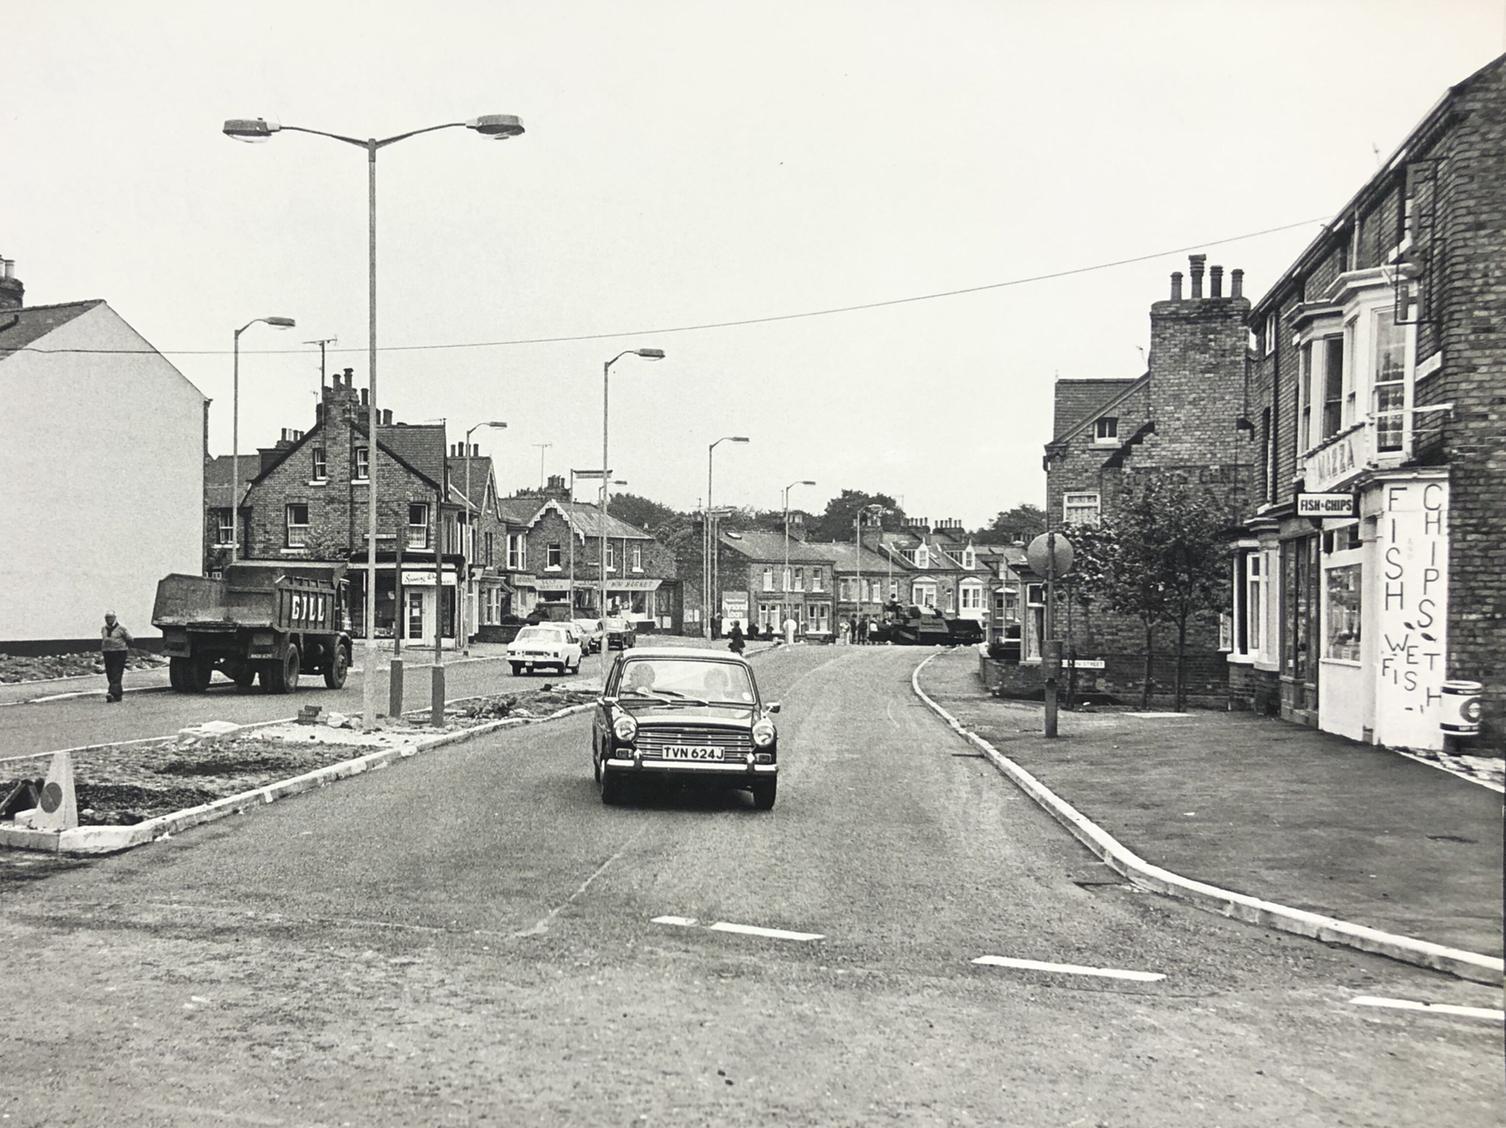 The vehicles looked very different in 1976 but there was still a fish and chip shop on the corner of Prospect Road roundabout.